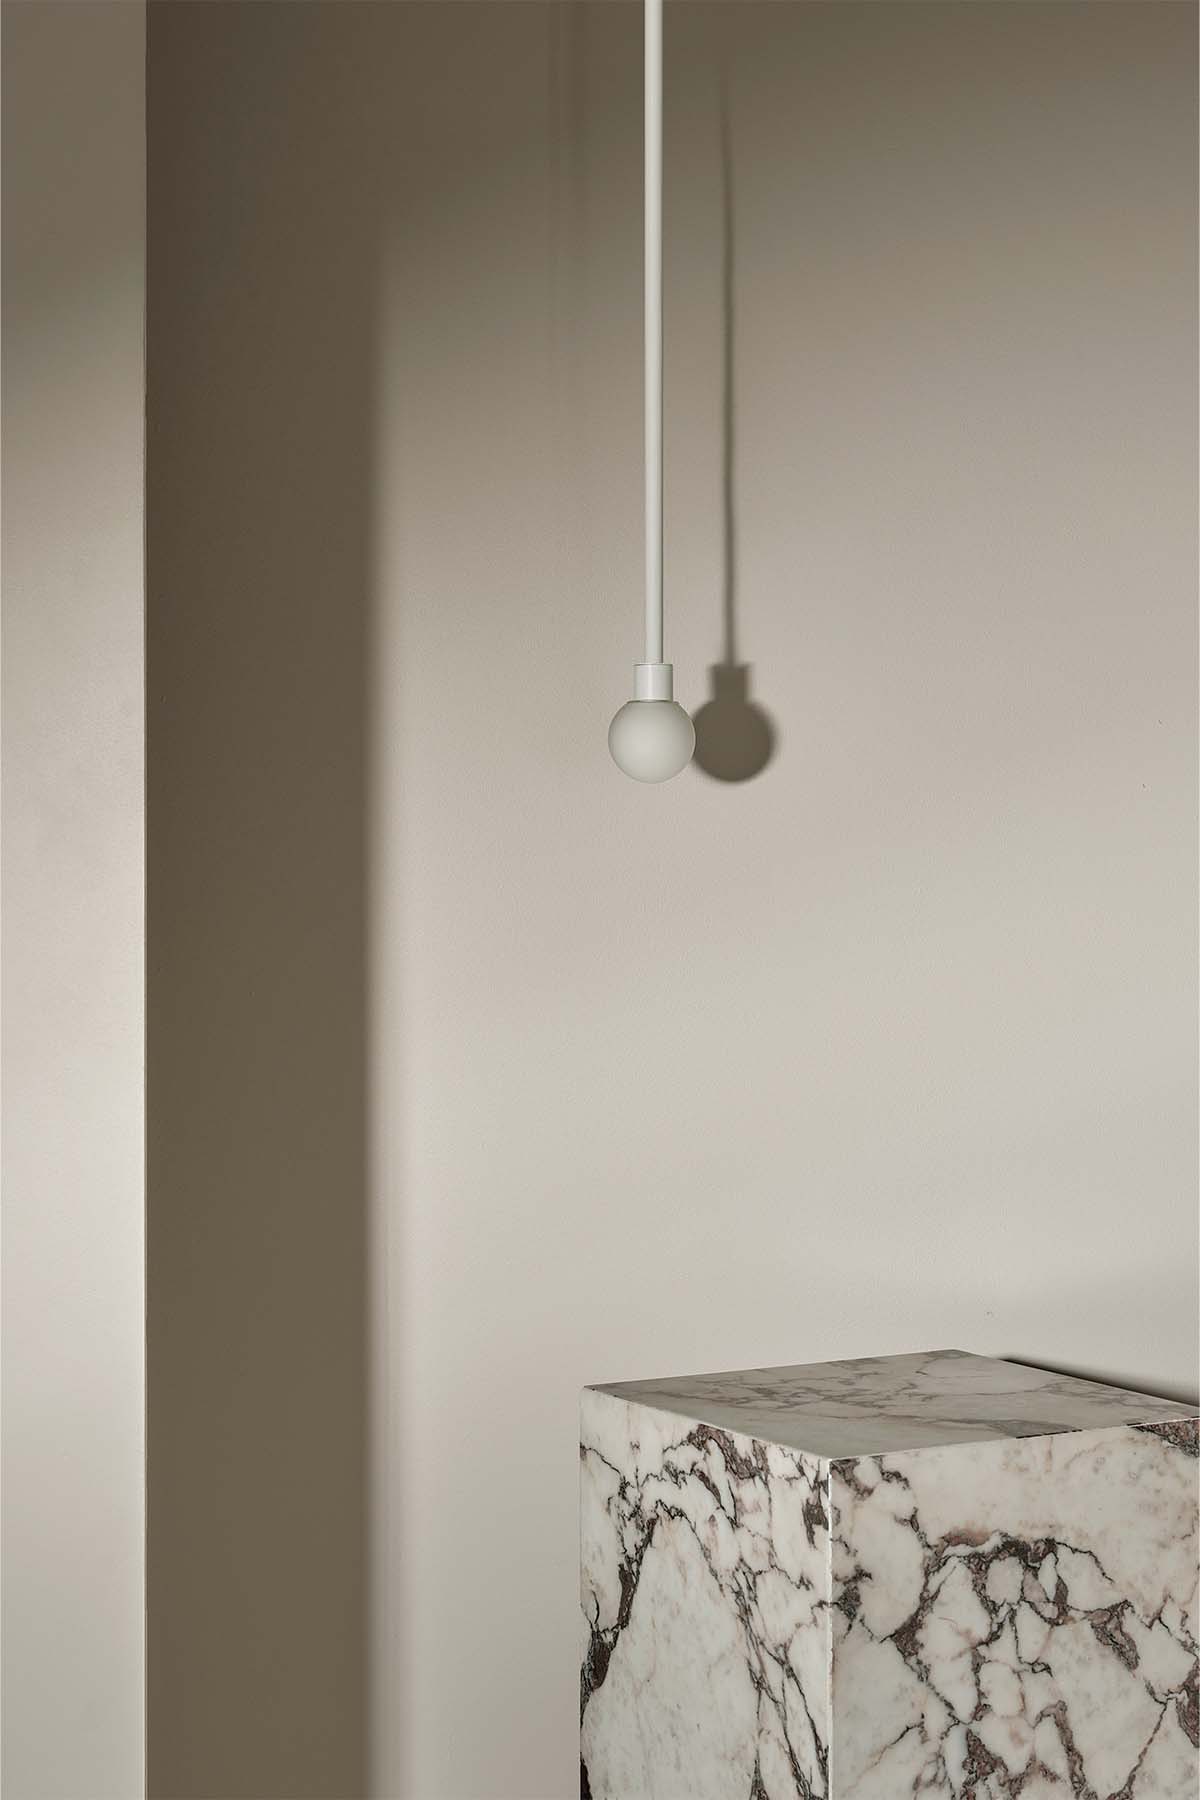 Orb Pendant, Mini in White Satin and White Frosted. Image by Lawrence Furzey